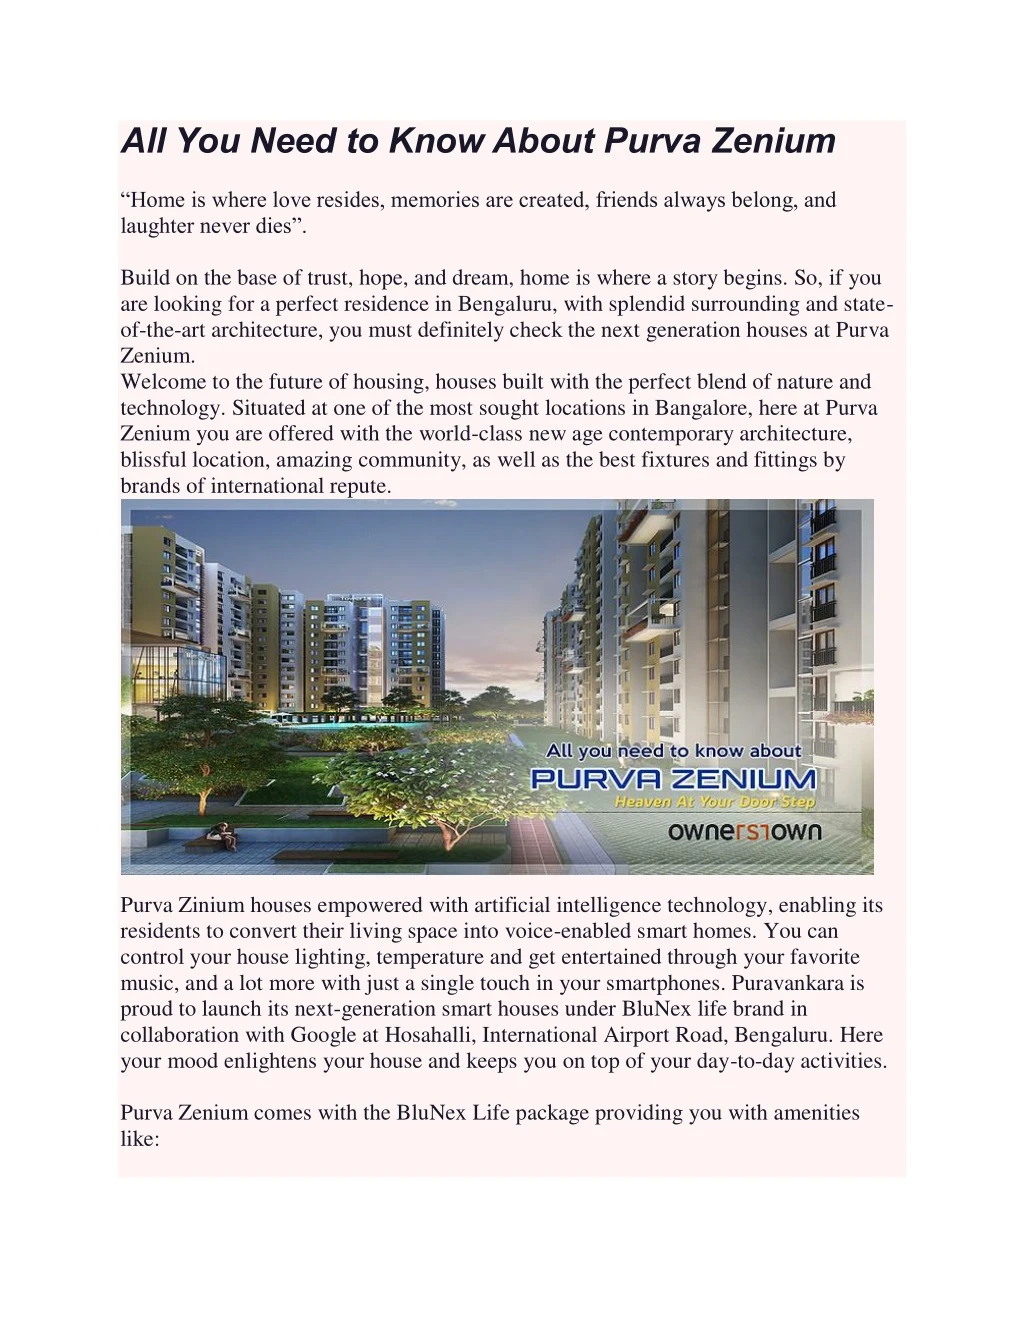 all you need to know about purva zenium home